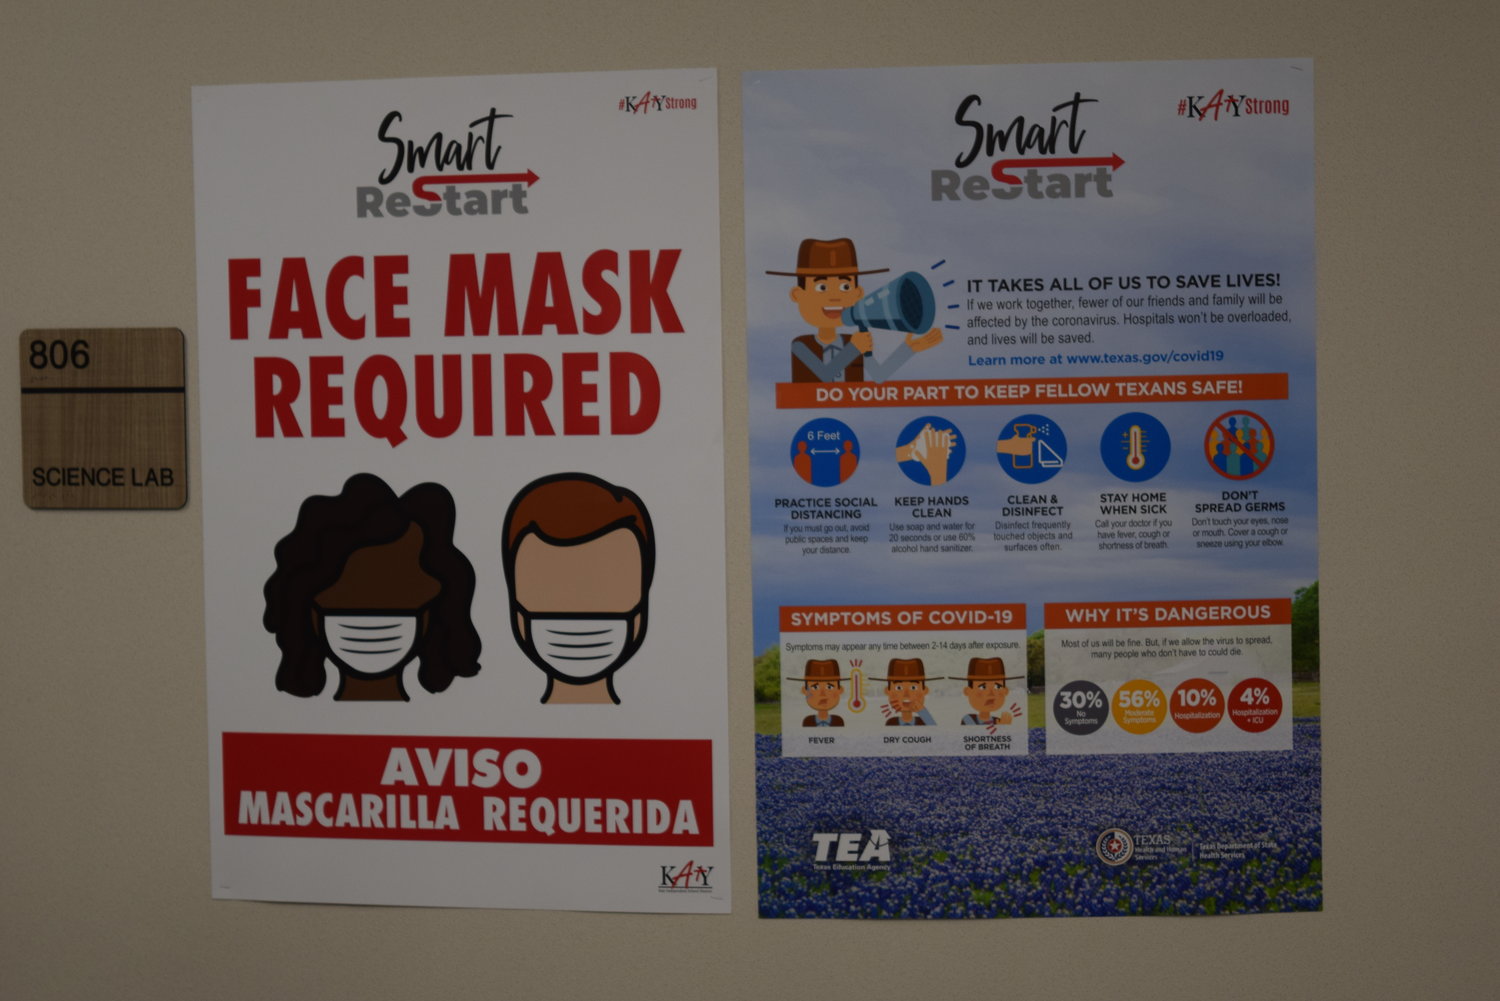 Signage throughout the halls at McElwain reminding students, staff and visitors to wear a mask and practice social distancing to mitigate the risks of spreading COVID-19. Students appeared more fascinated by the reporters covering the school opening than the masks which most seemed used to and comfortable with.